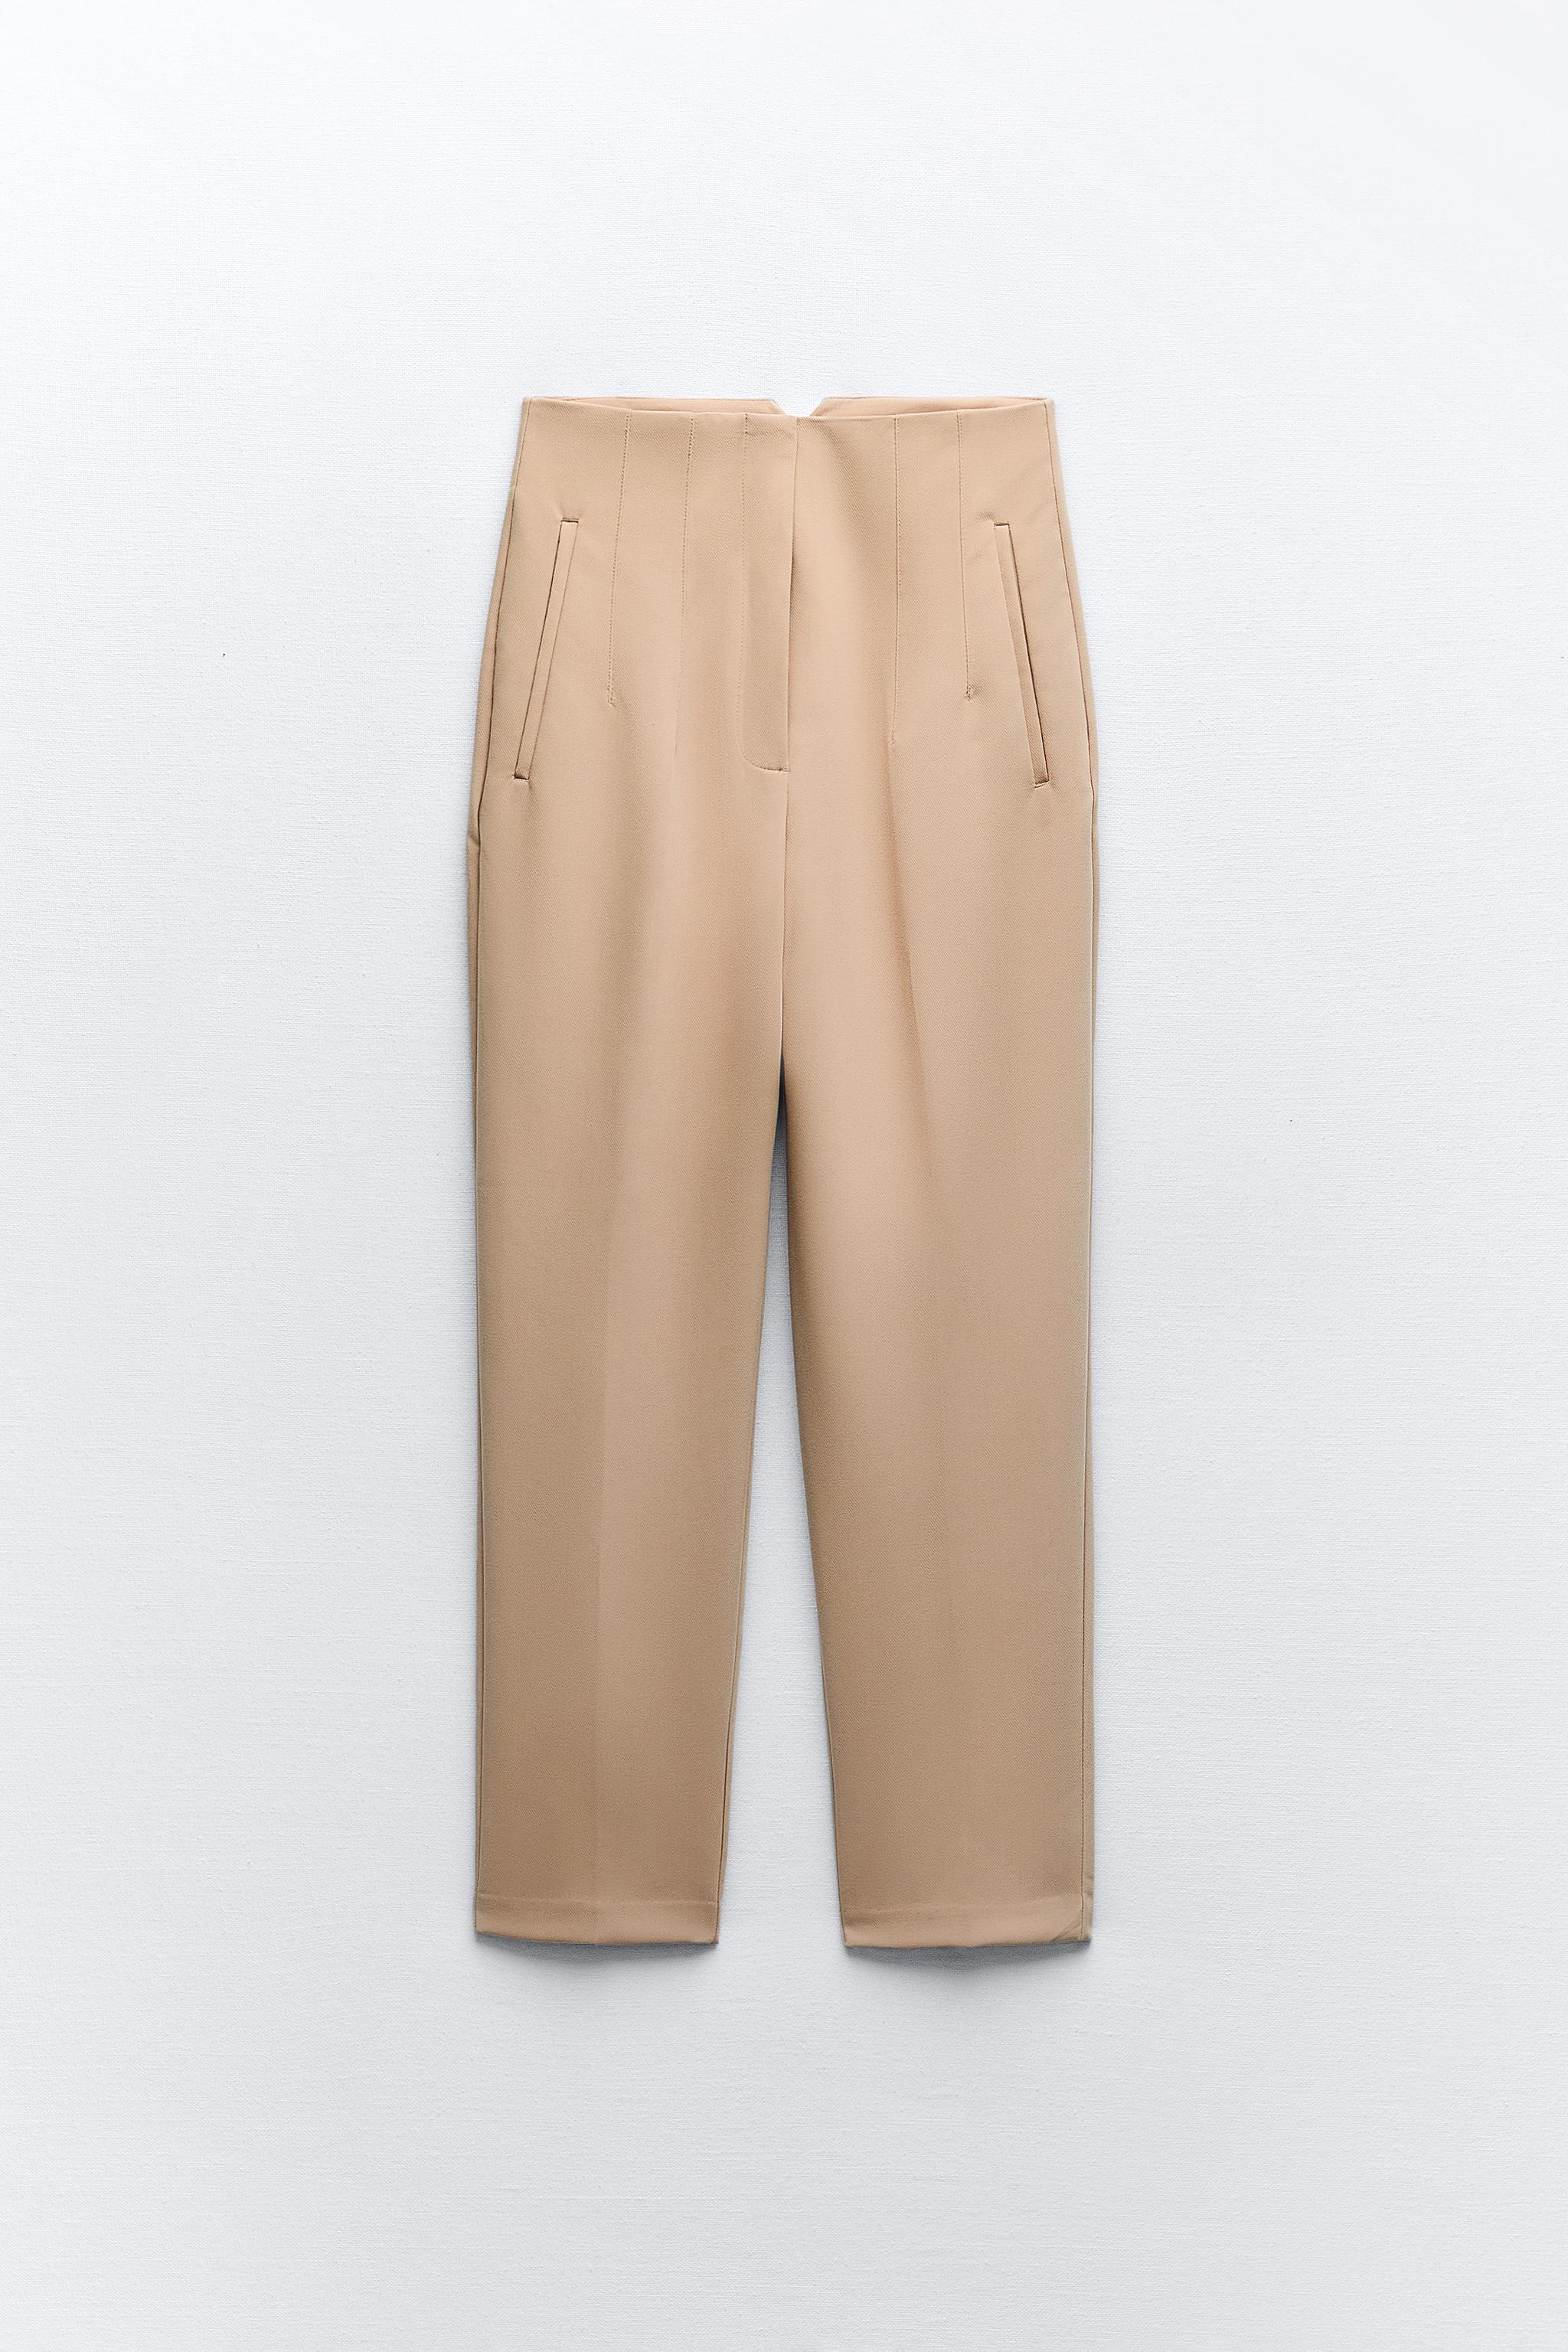 ZARA 2023 SS Casual Style Formal Style Pants (9929/328)